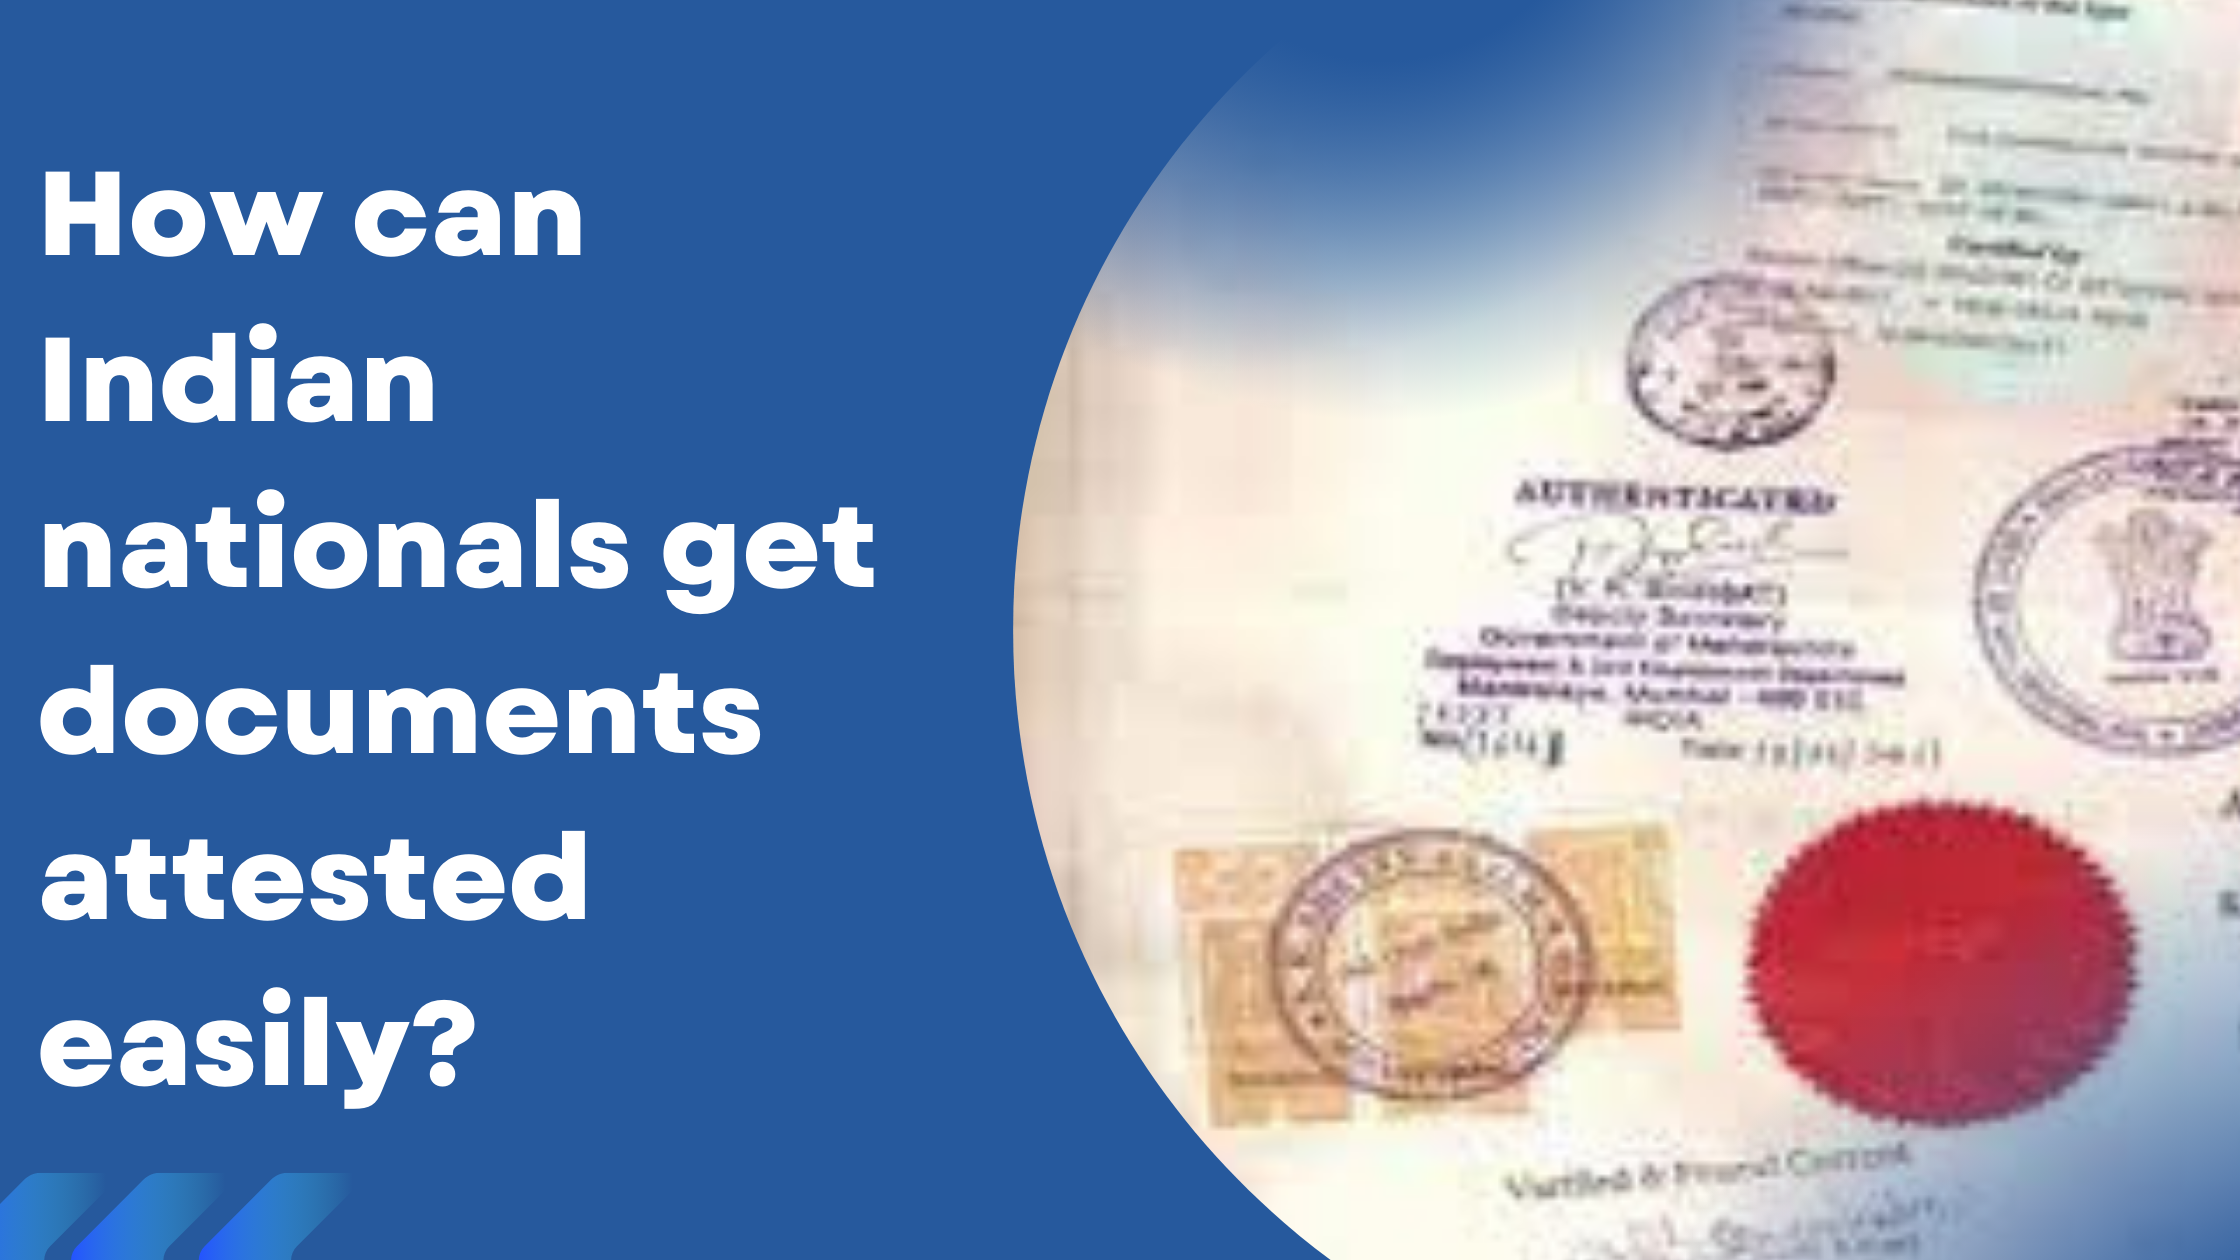 How can Indian nationals get documents attested easily?